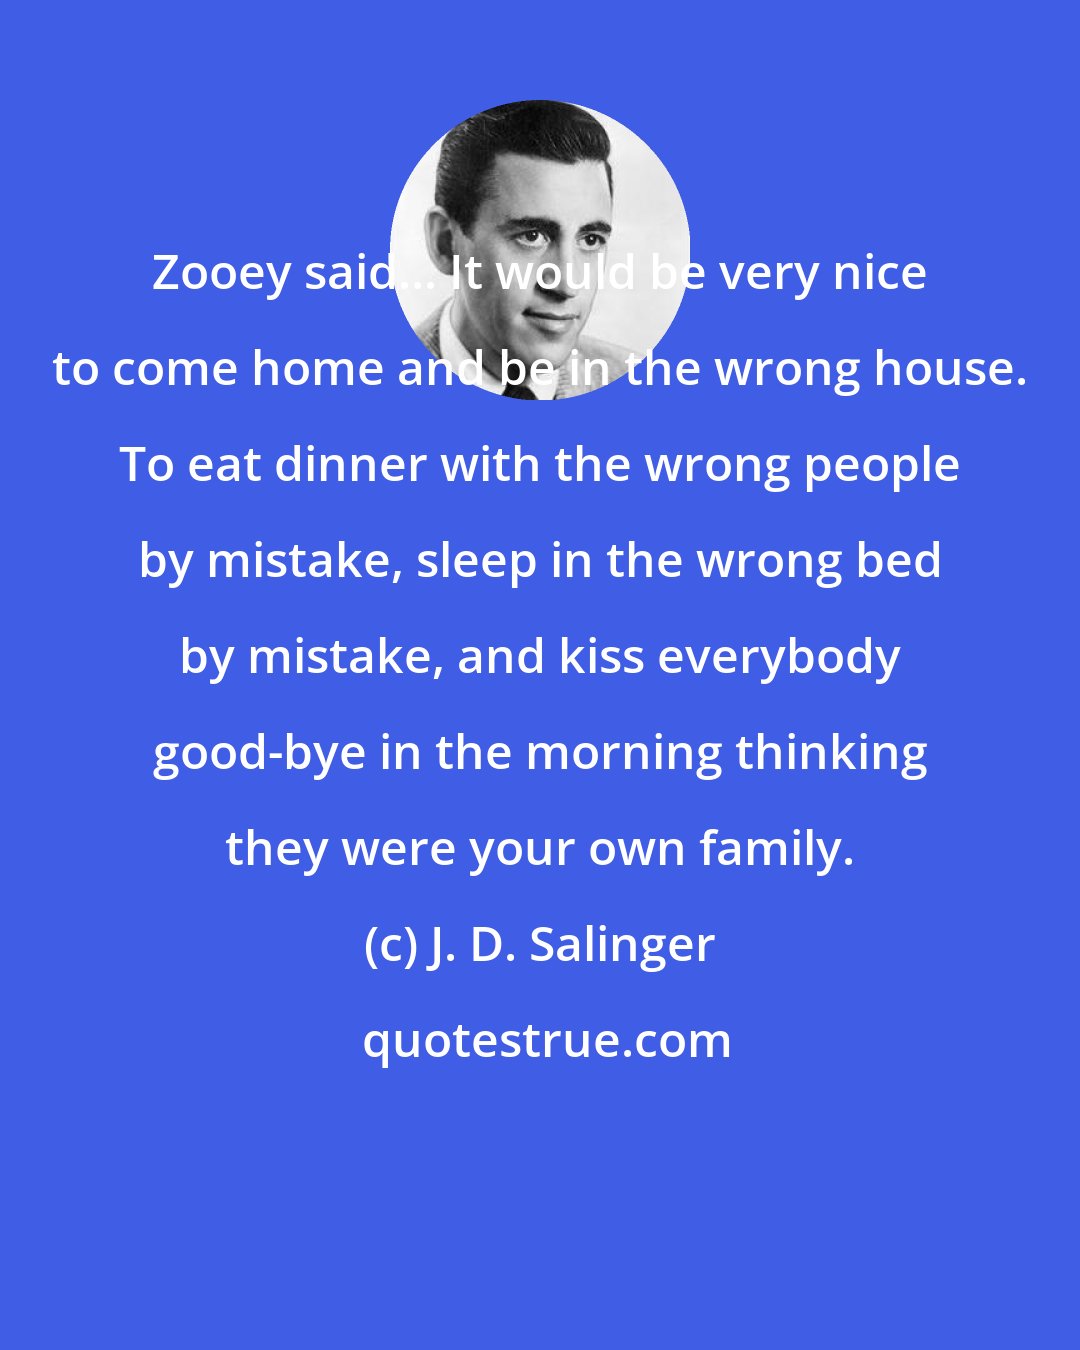 J. D. Salinger: Zooey said... It would be very nice to come home and be in the wrong house. To eat dinner with the wrong people by mistake, sleep in the wrong bed by mistake, and kiss everybody good-bye in the morning thinking they were your own family.